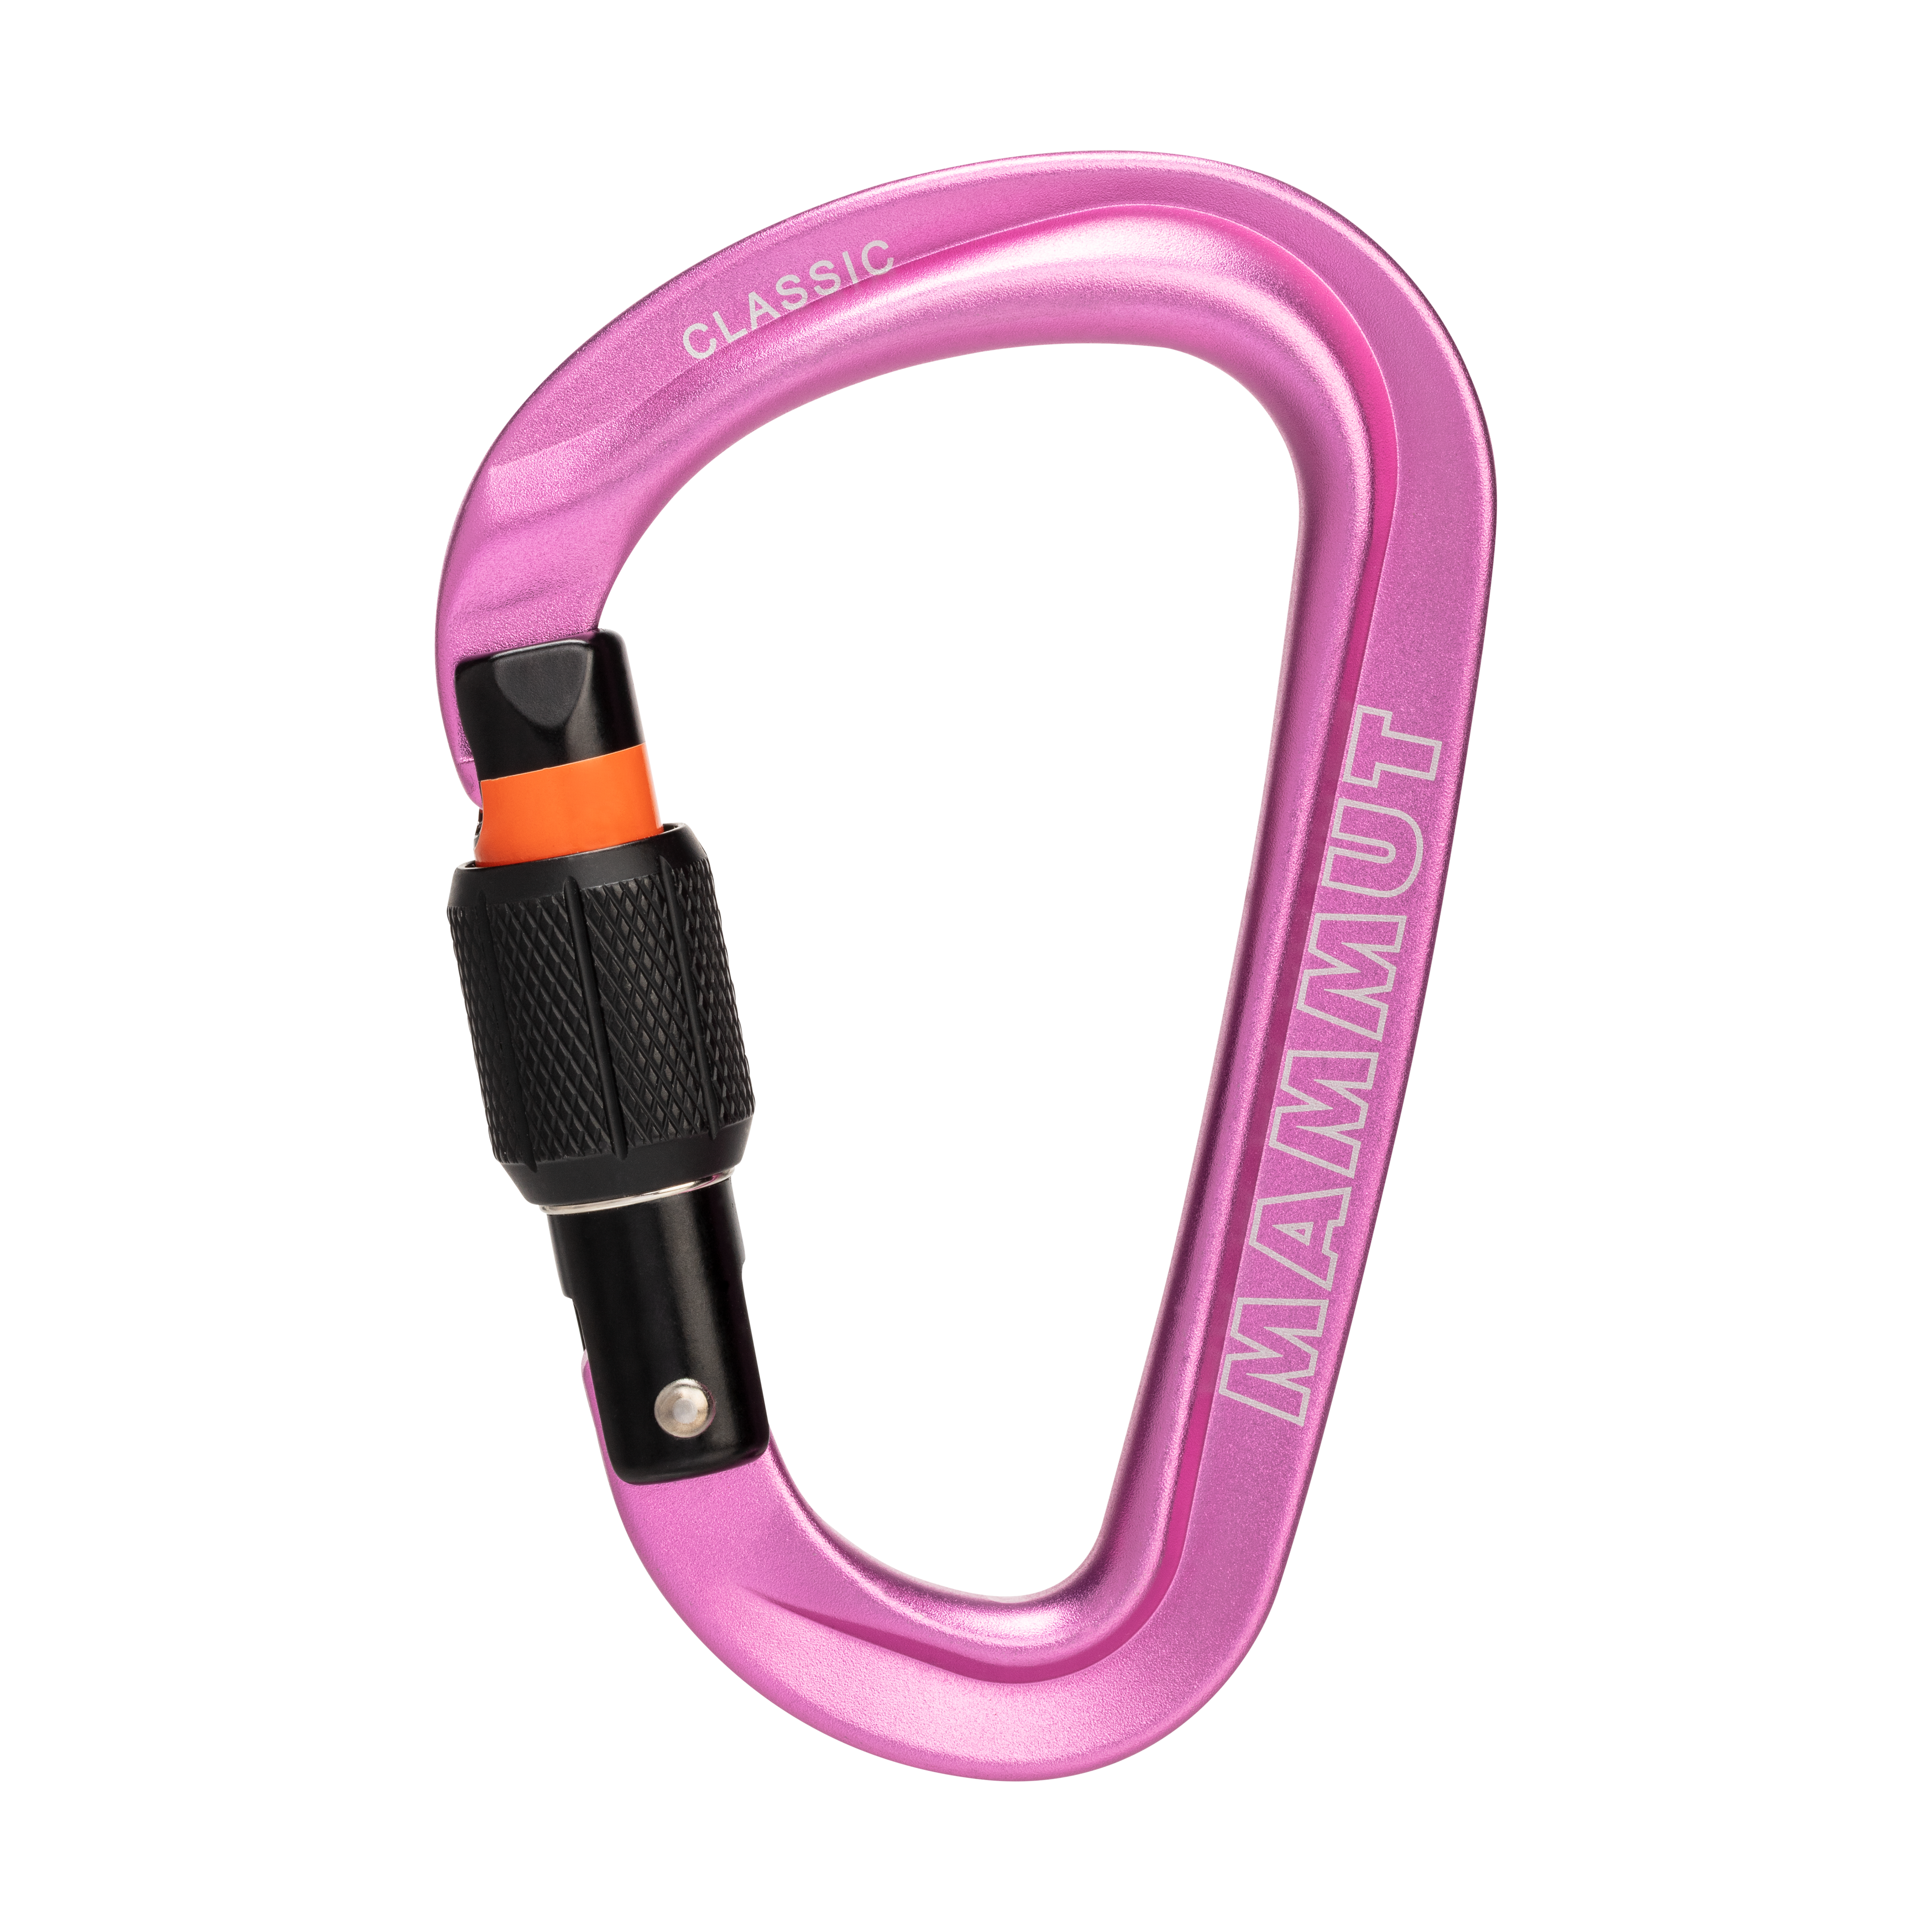 Classic HMS Screwgate Carabiner - pink, one size thumbnail